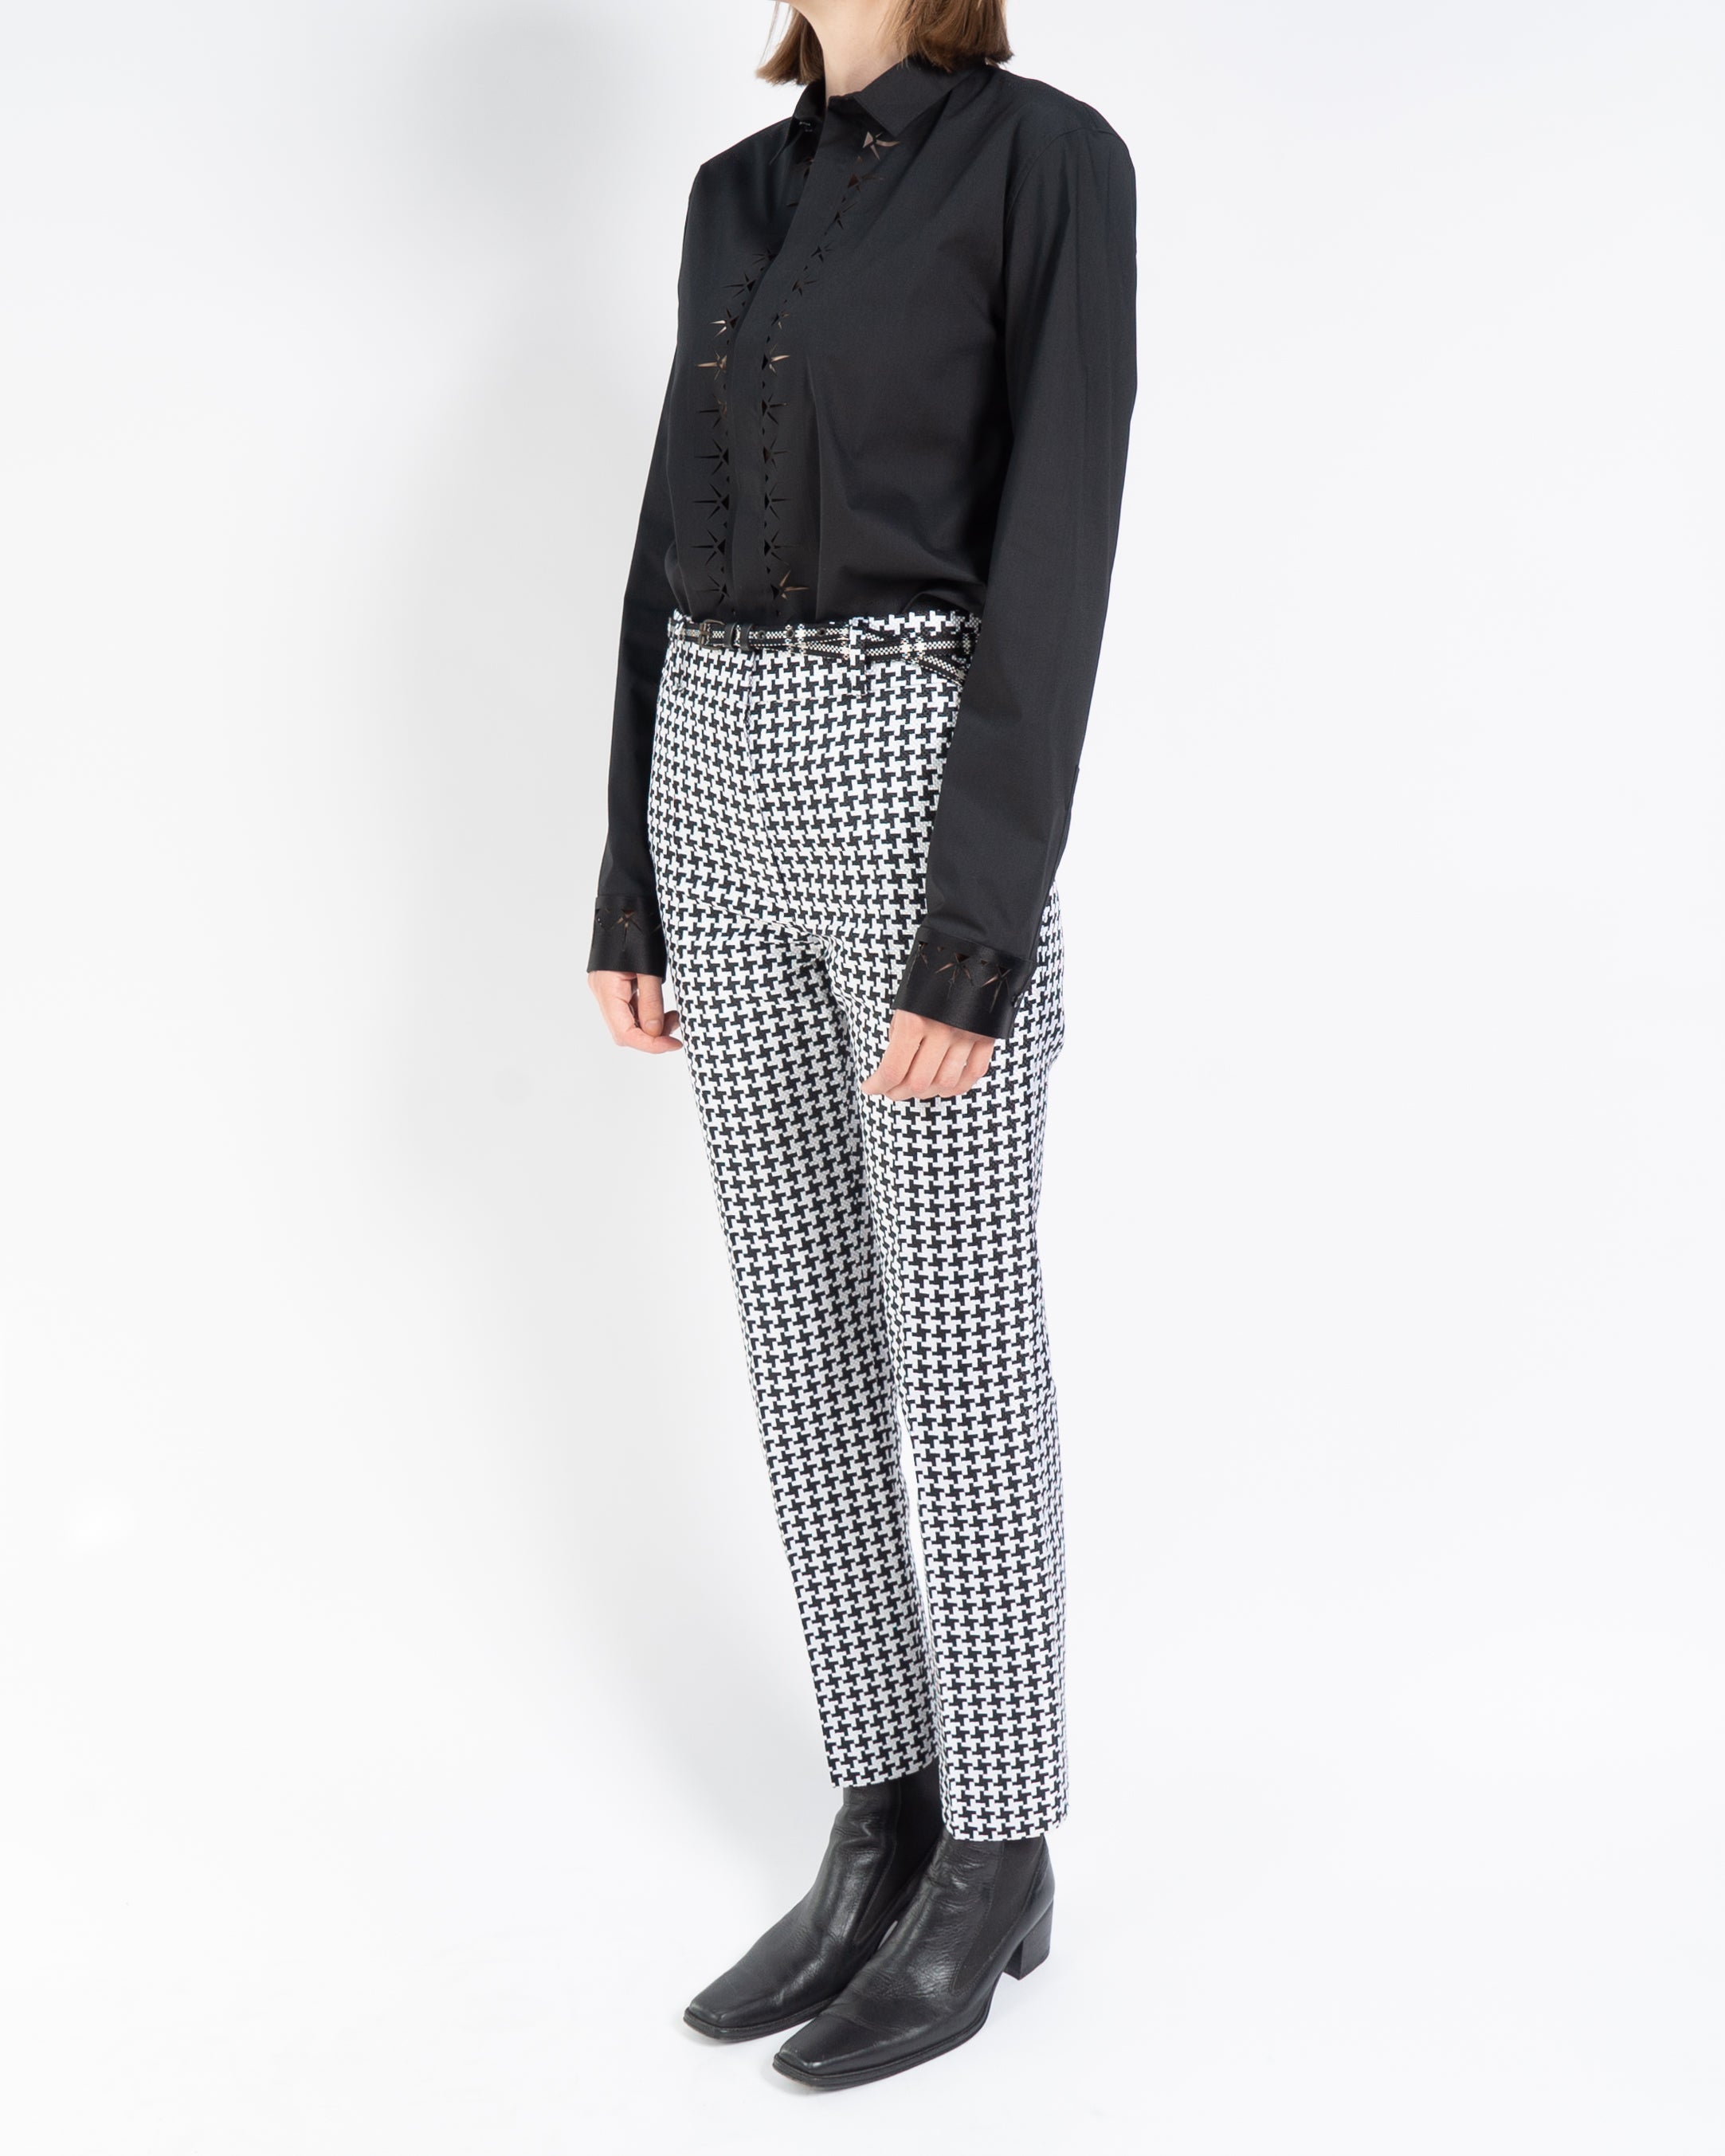 SS19 Black & White Houndstooth Silk Jacquard Trousers